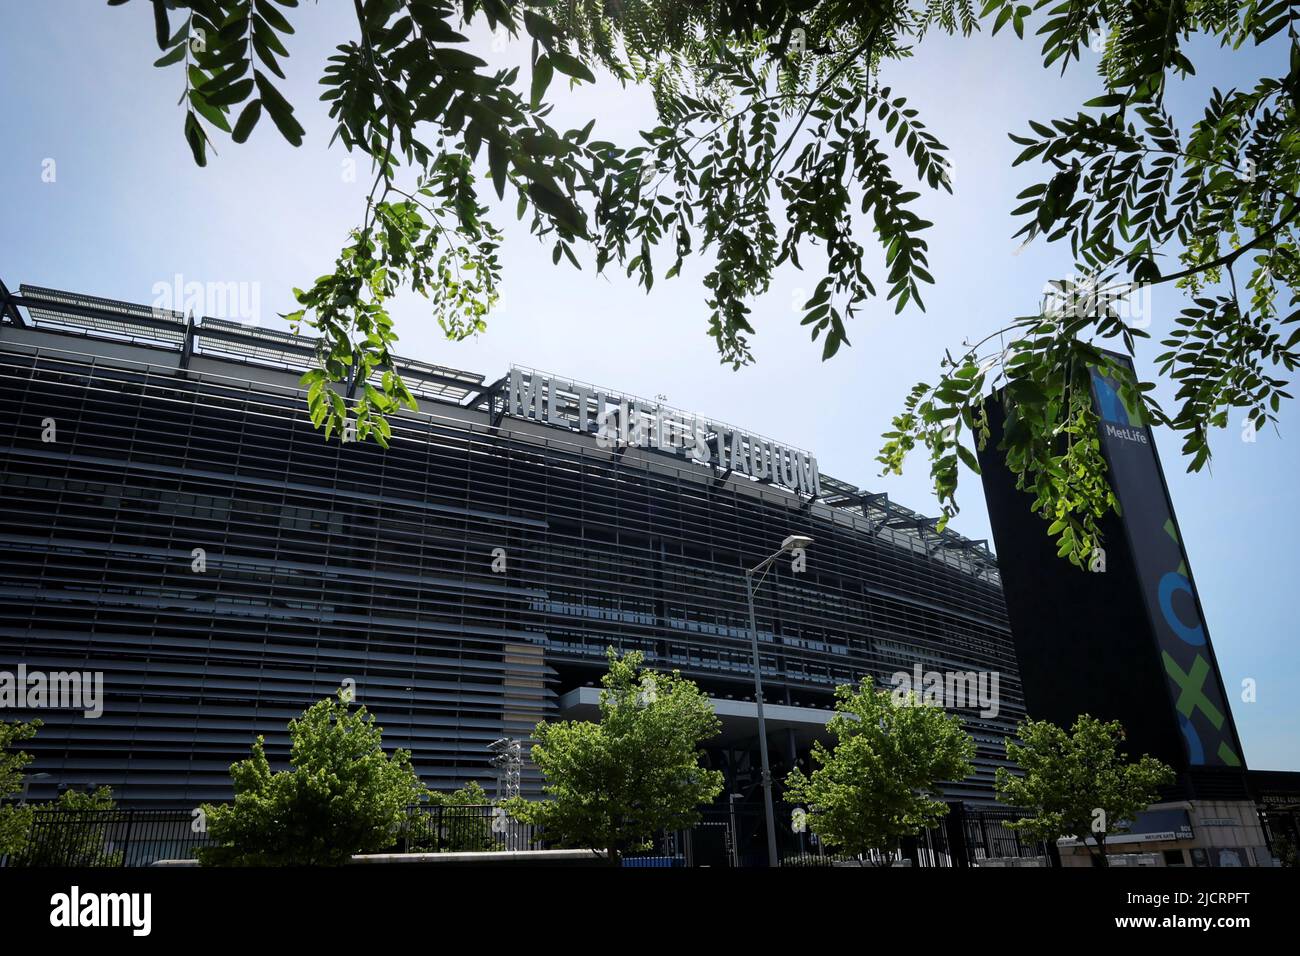 MetLife Stadium is pictured in East Rutherford, New Jersey, U.S. June 15, 2022. REUTERS/Mike Segar Stock Photo